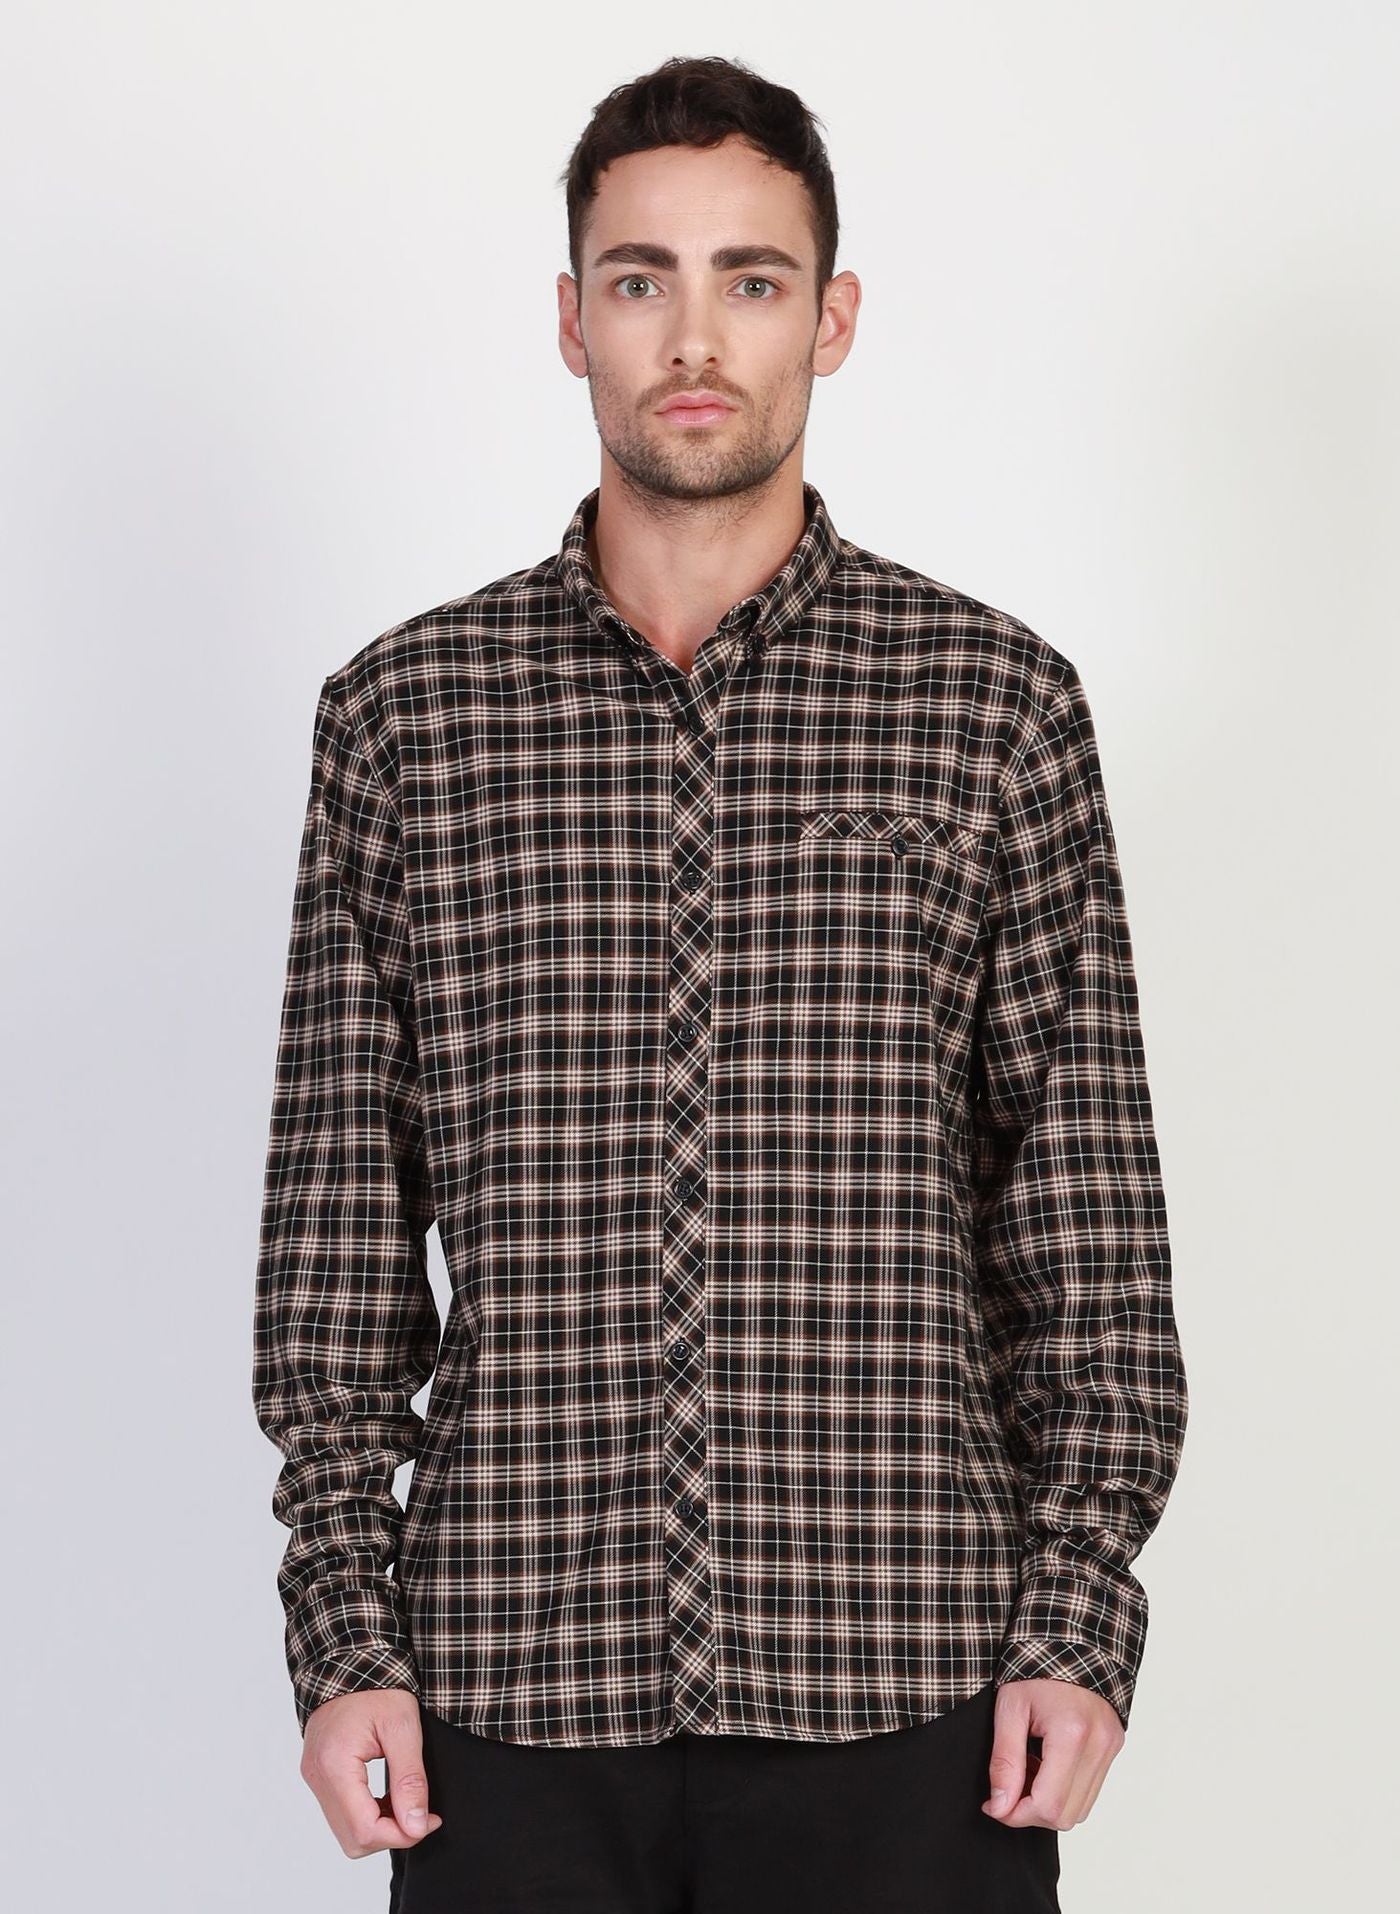 Federation - On Point Shirt - Coco Check